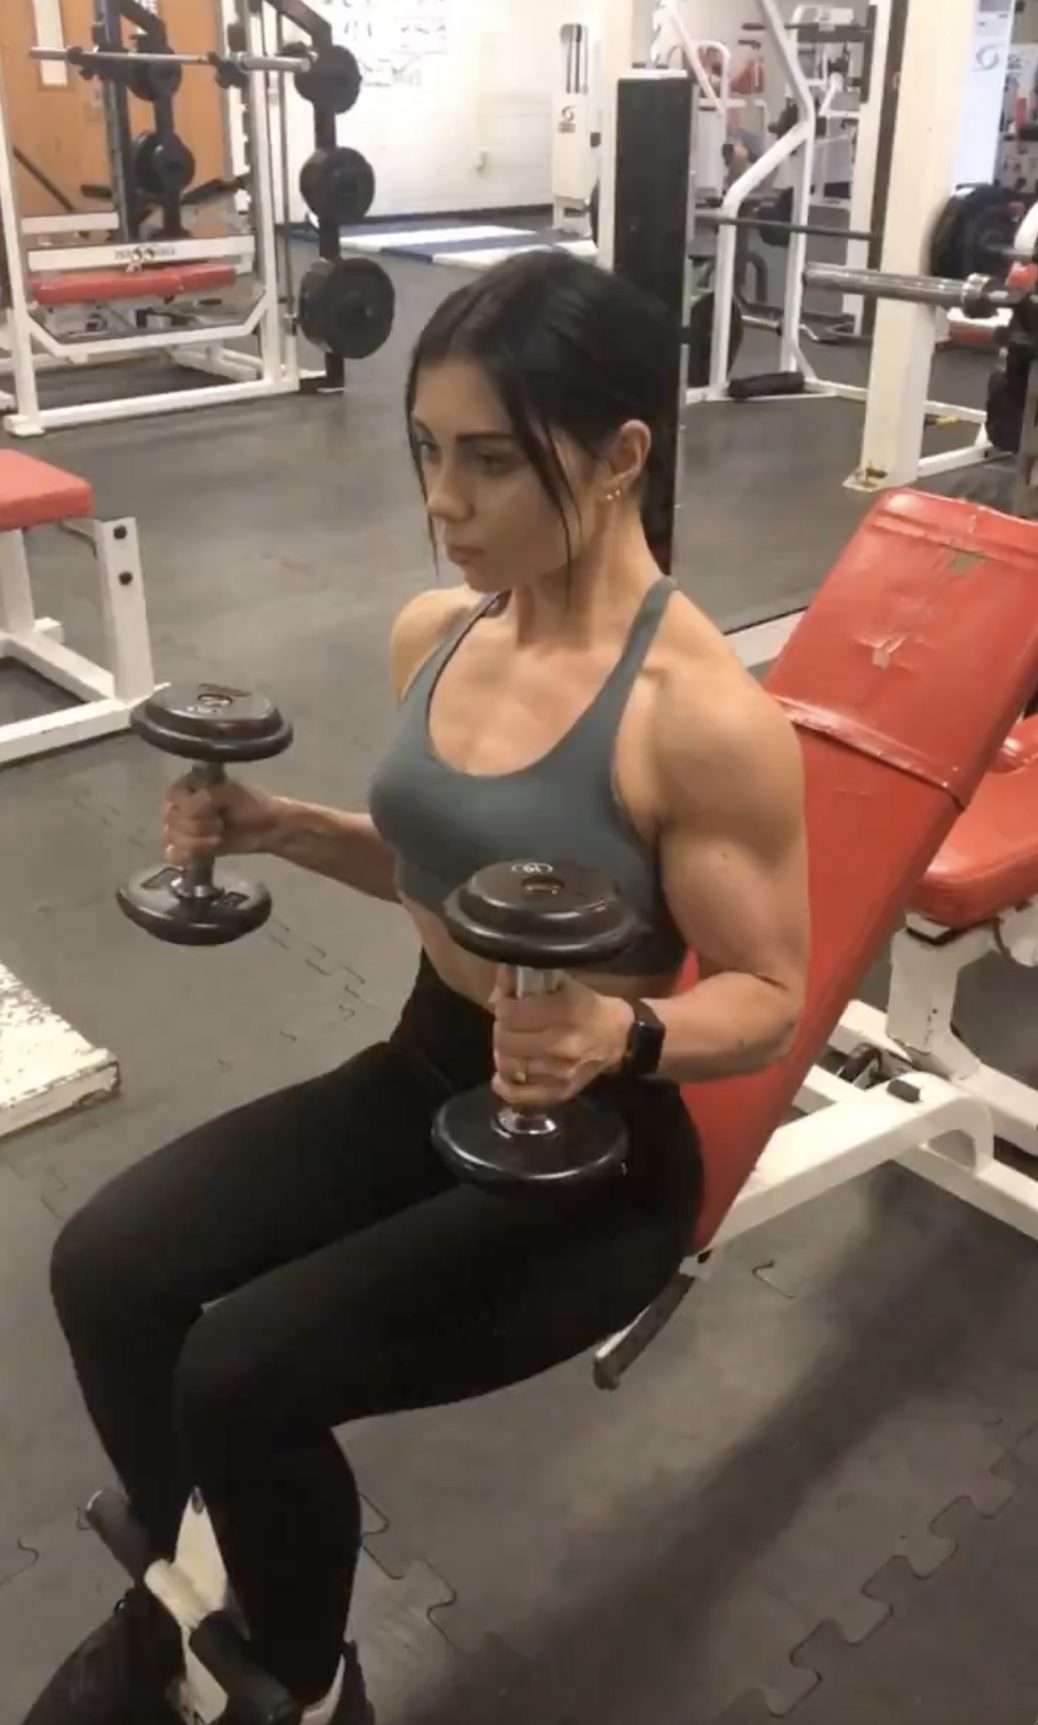 Photo of Brooke M lifting weights